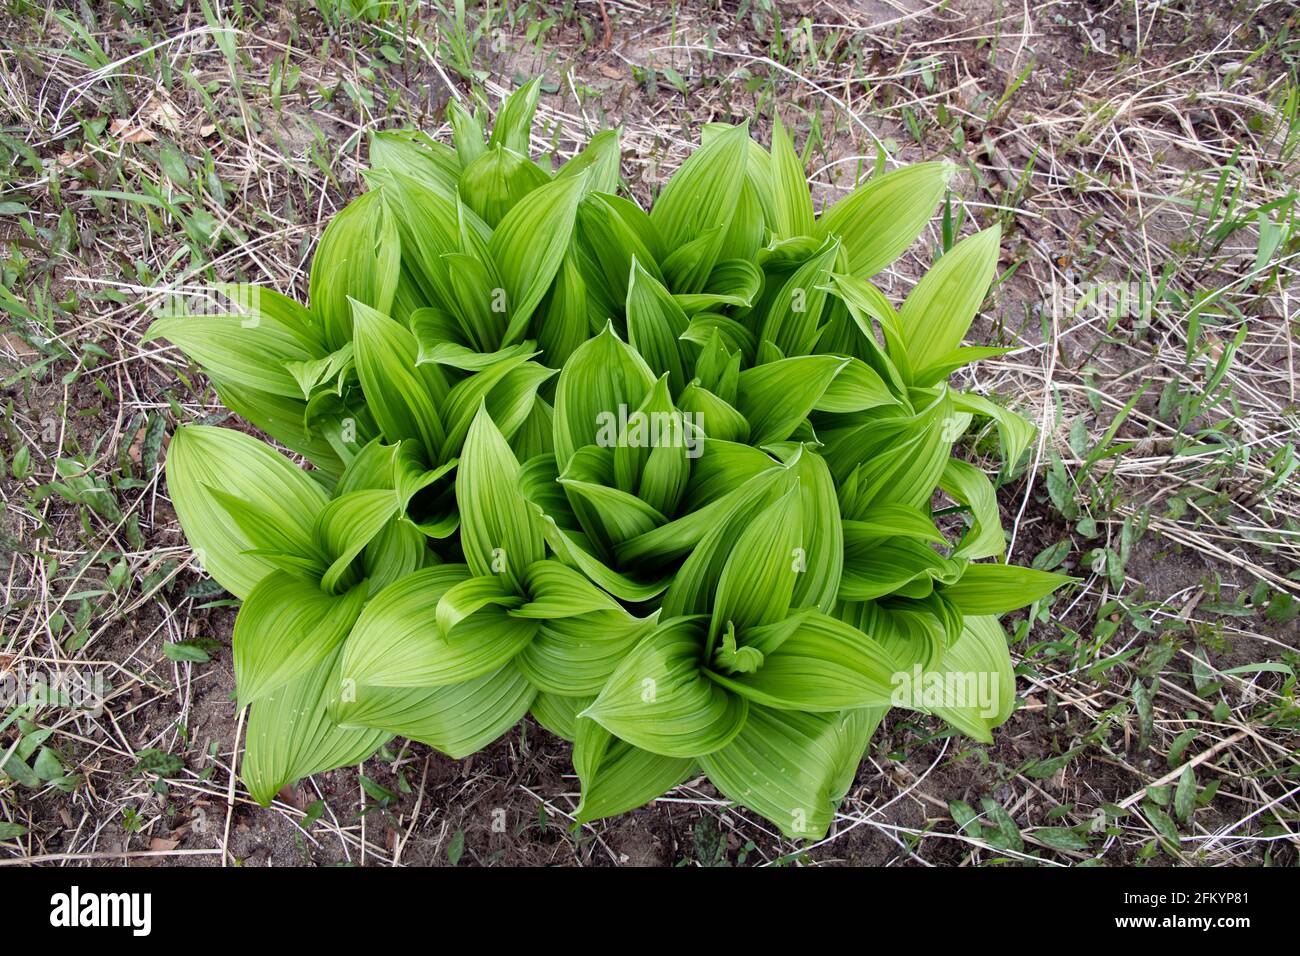 A  green false hellebore plant, Veratrum viride, growing in the Adirondack Mountains, NY USA, in early spring Stock Photo